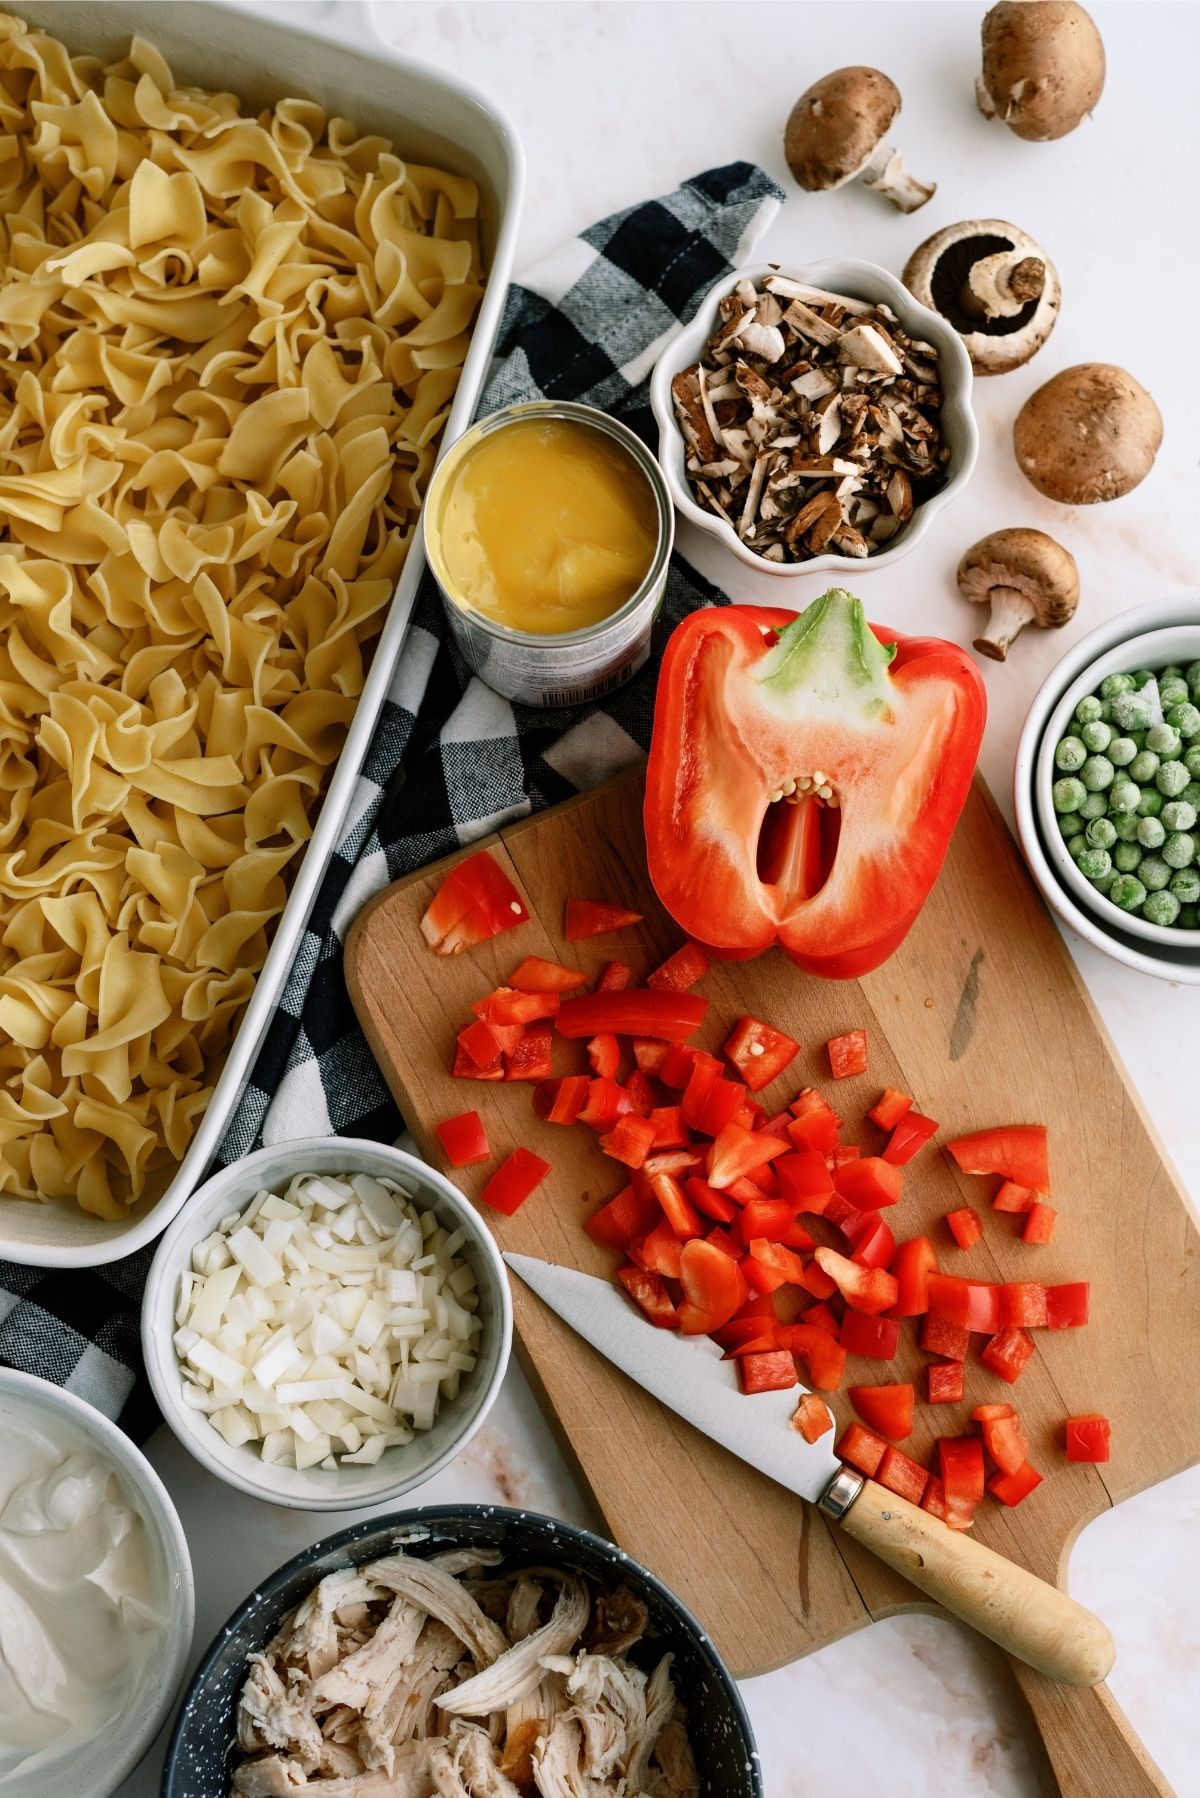 Ingredients for Easy Chicken and Noodle Casserole